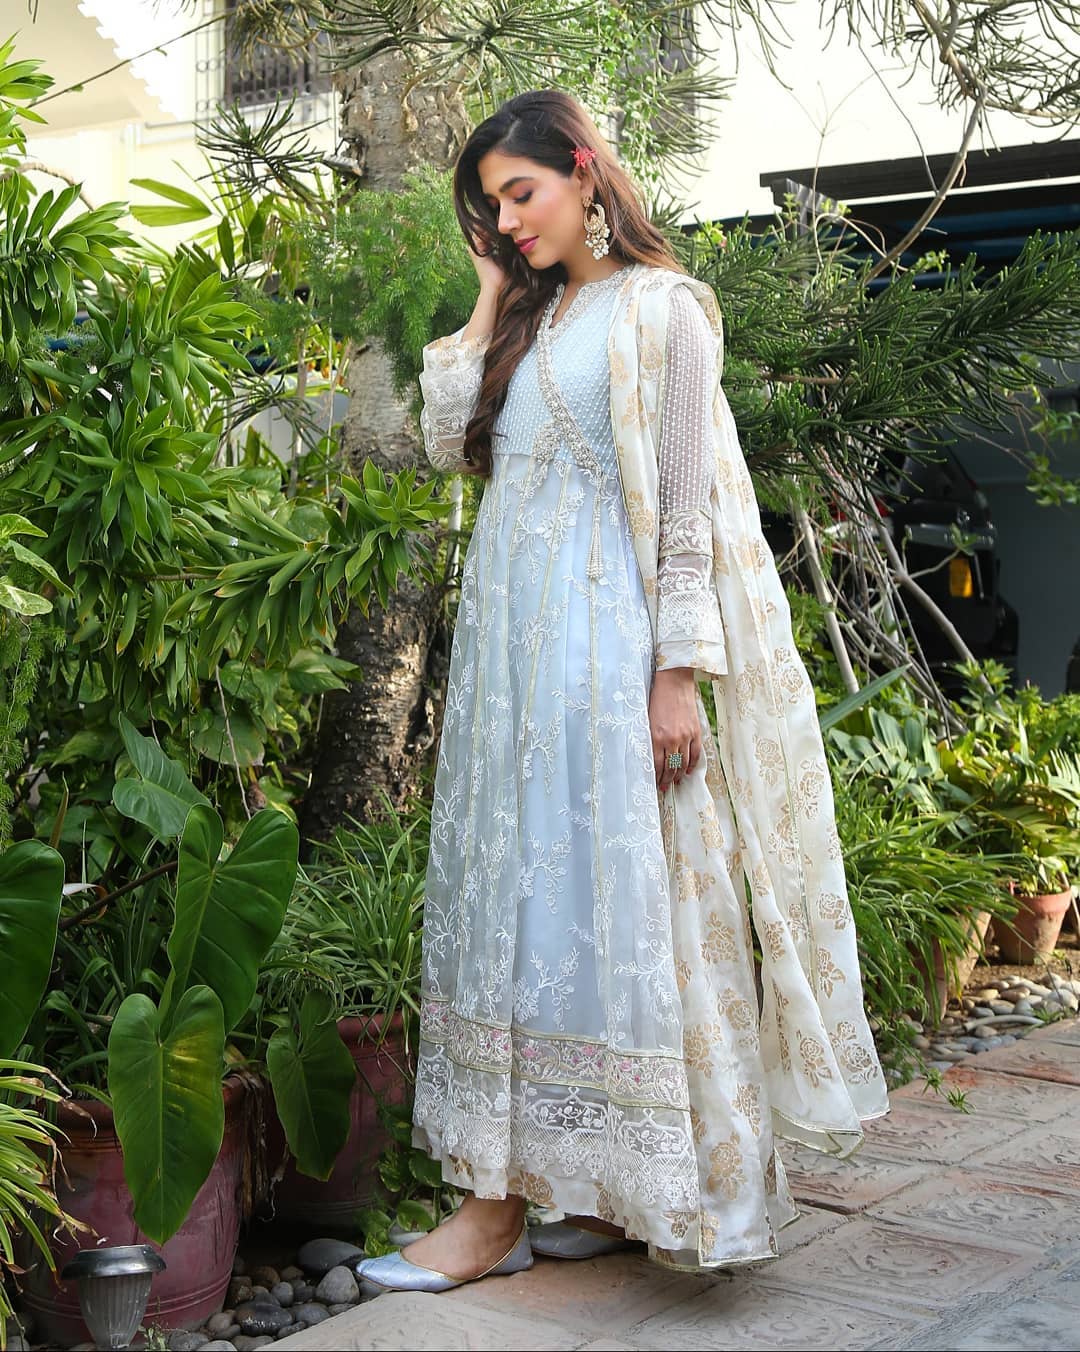 Beautiful Pakistani Celebrities First Day Eid Pictures - Part-1